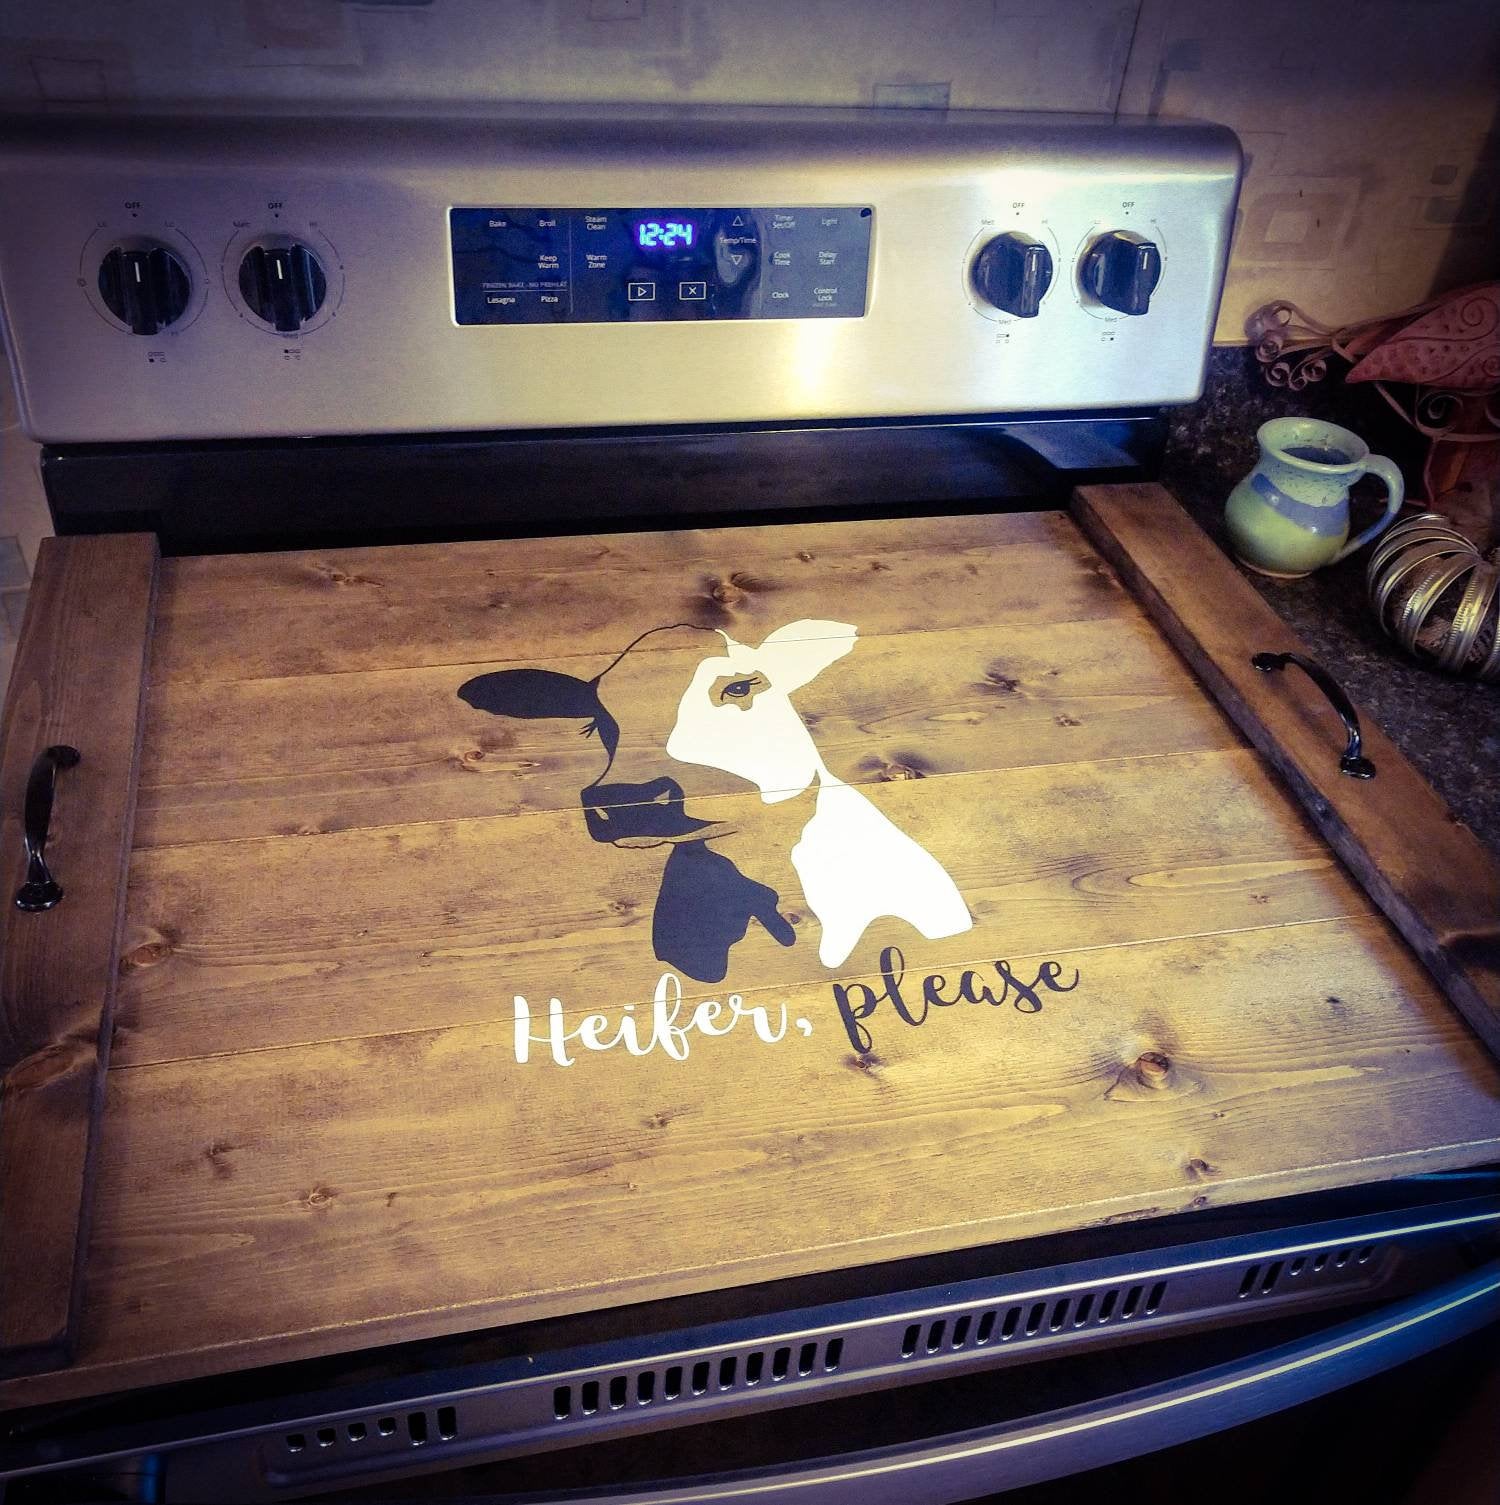 Stovetop Cutting Board / Noodle Board / Serving Tray